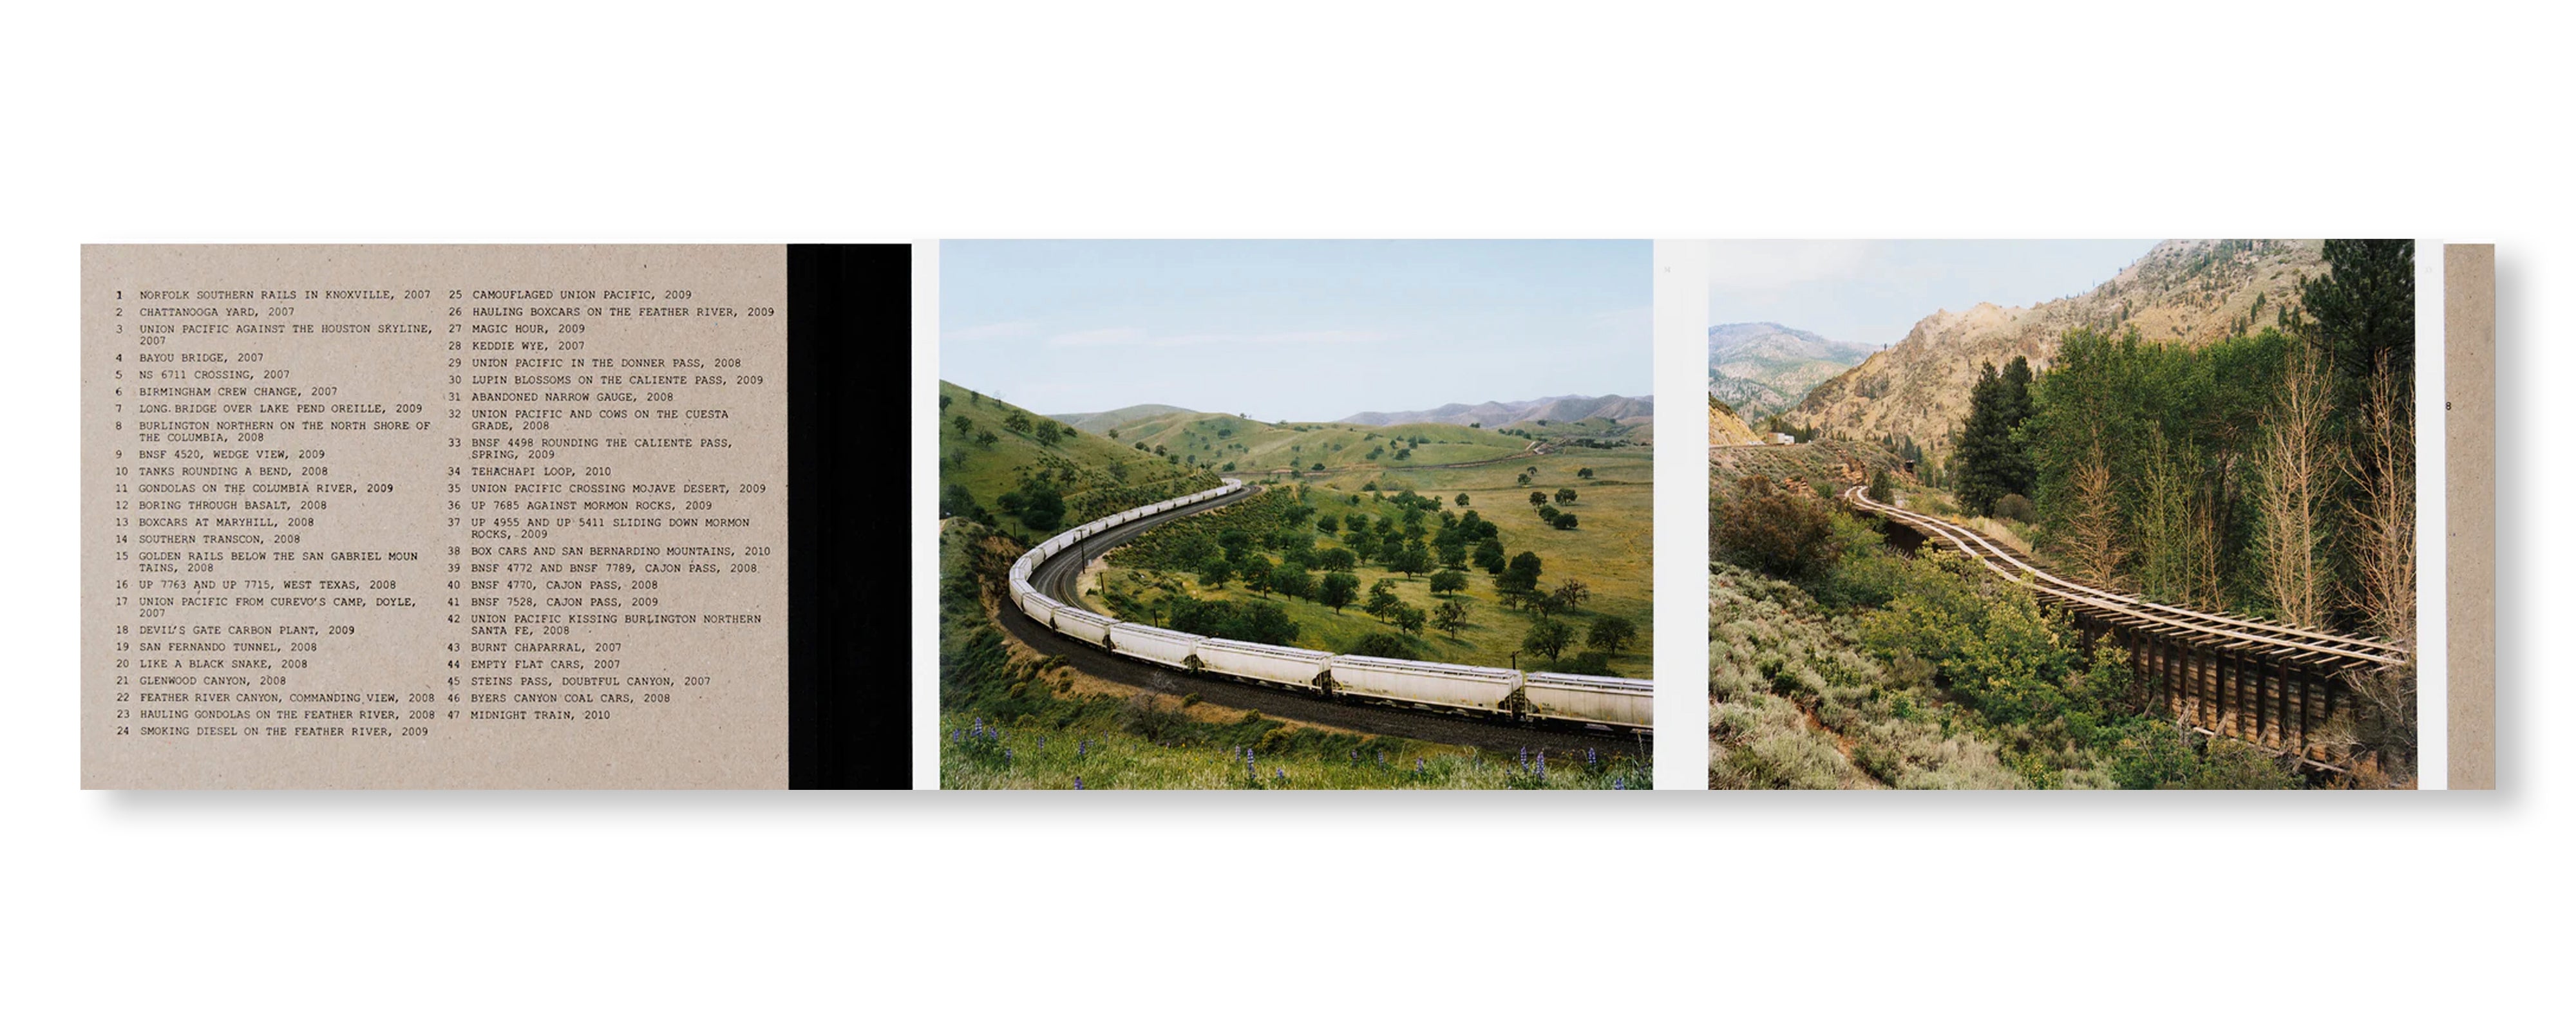 THIS TRAIN by Justine Kurland [SIGNED]